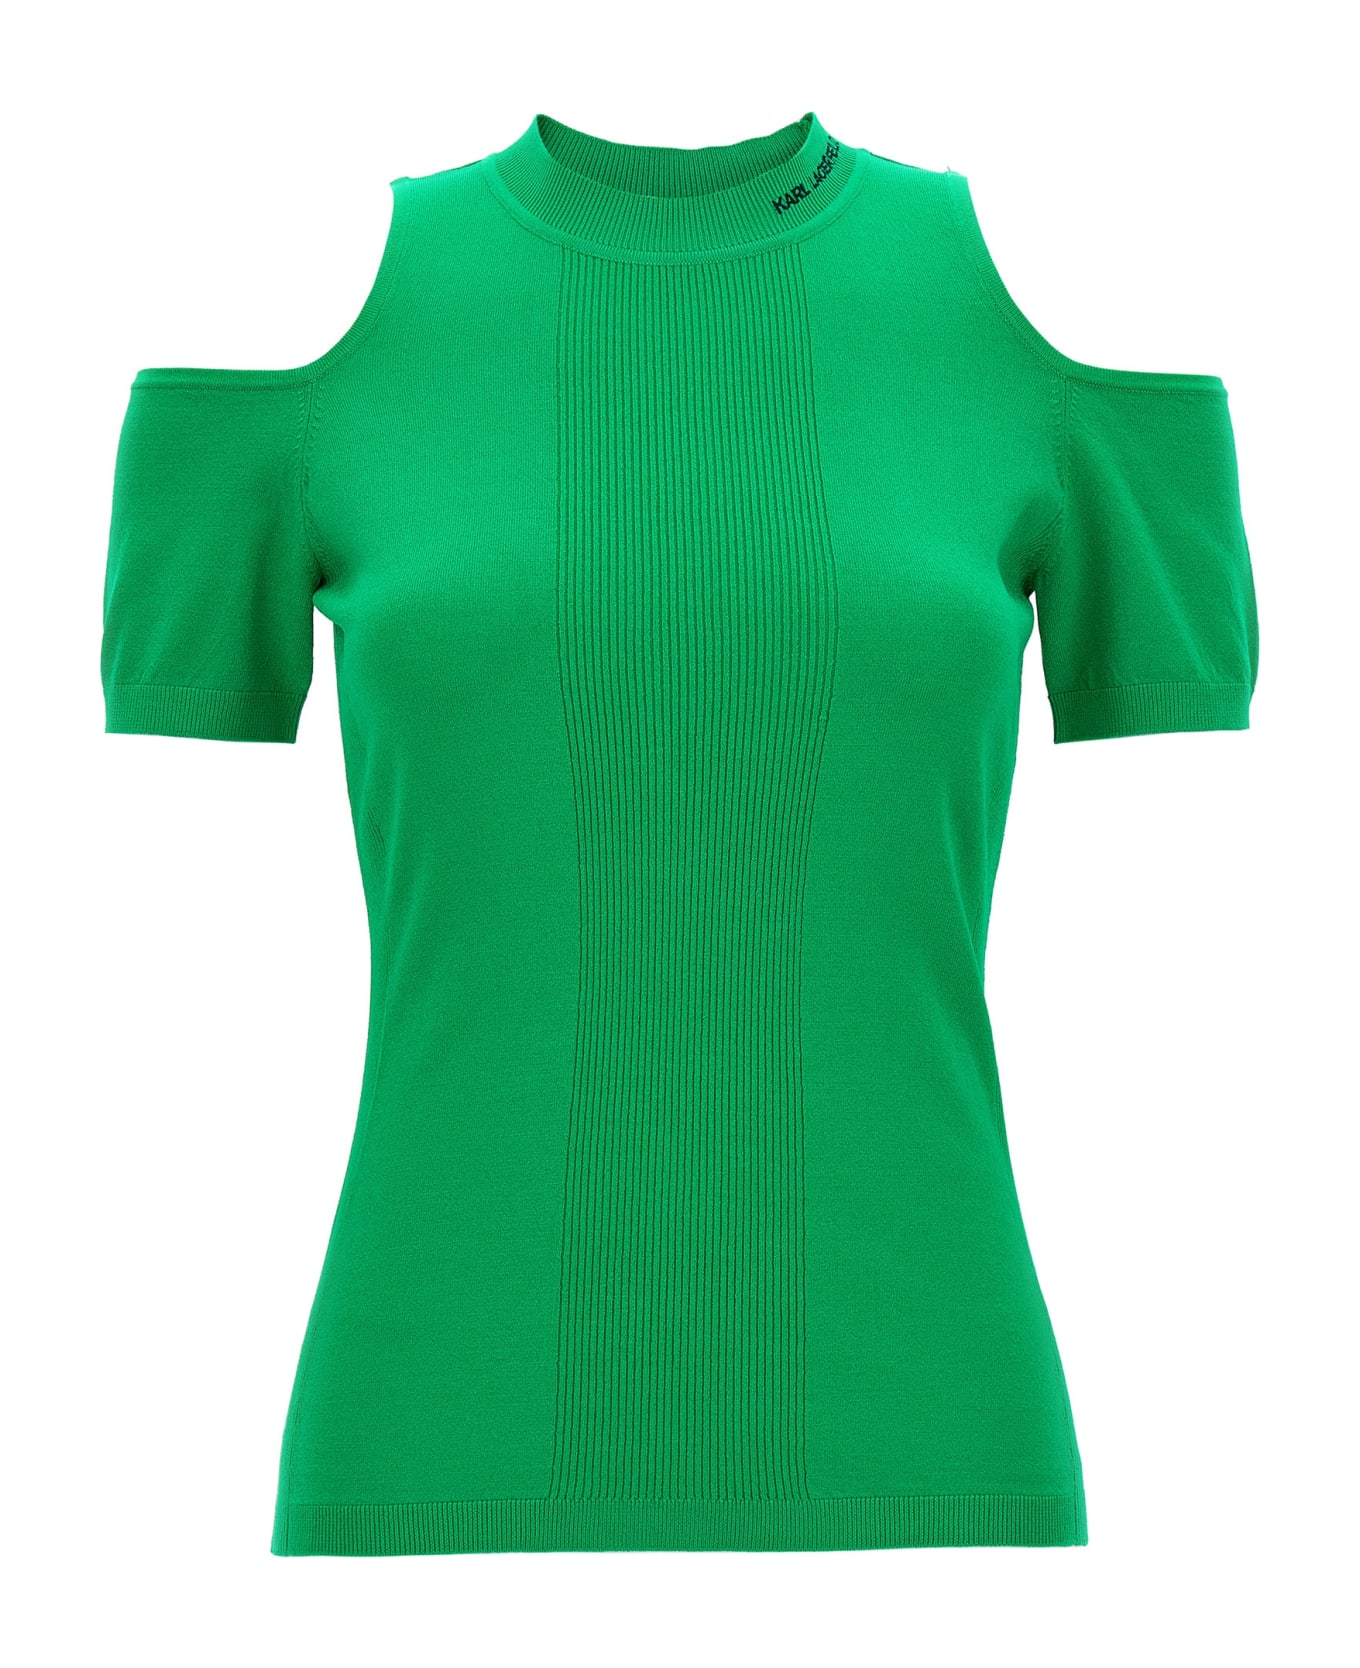 Karl Lagerfeld Cut Out Top - Green